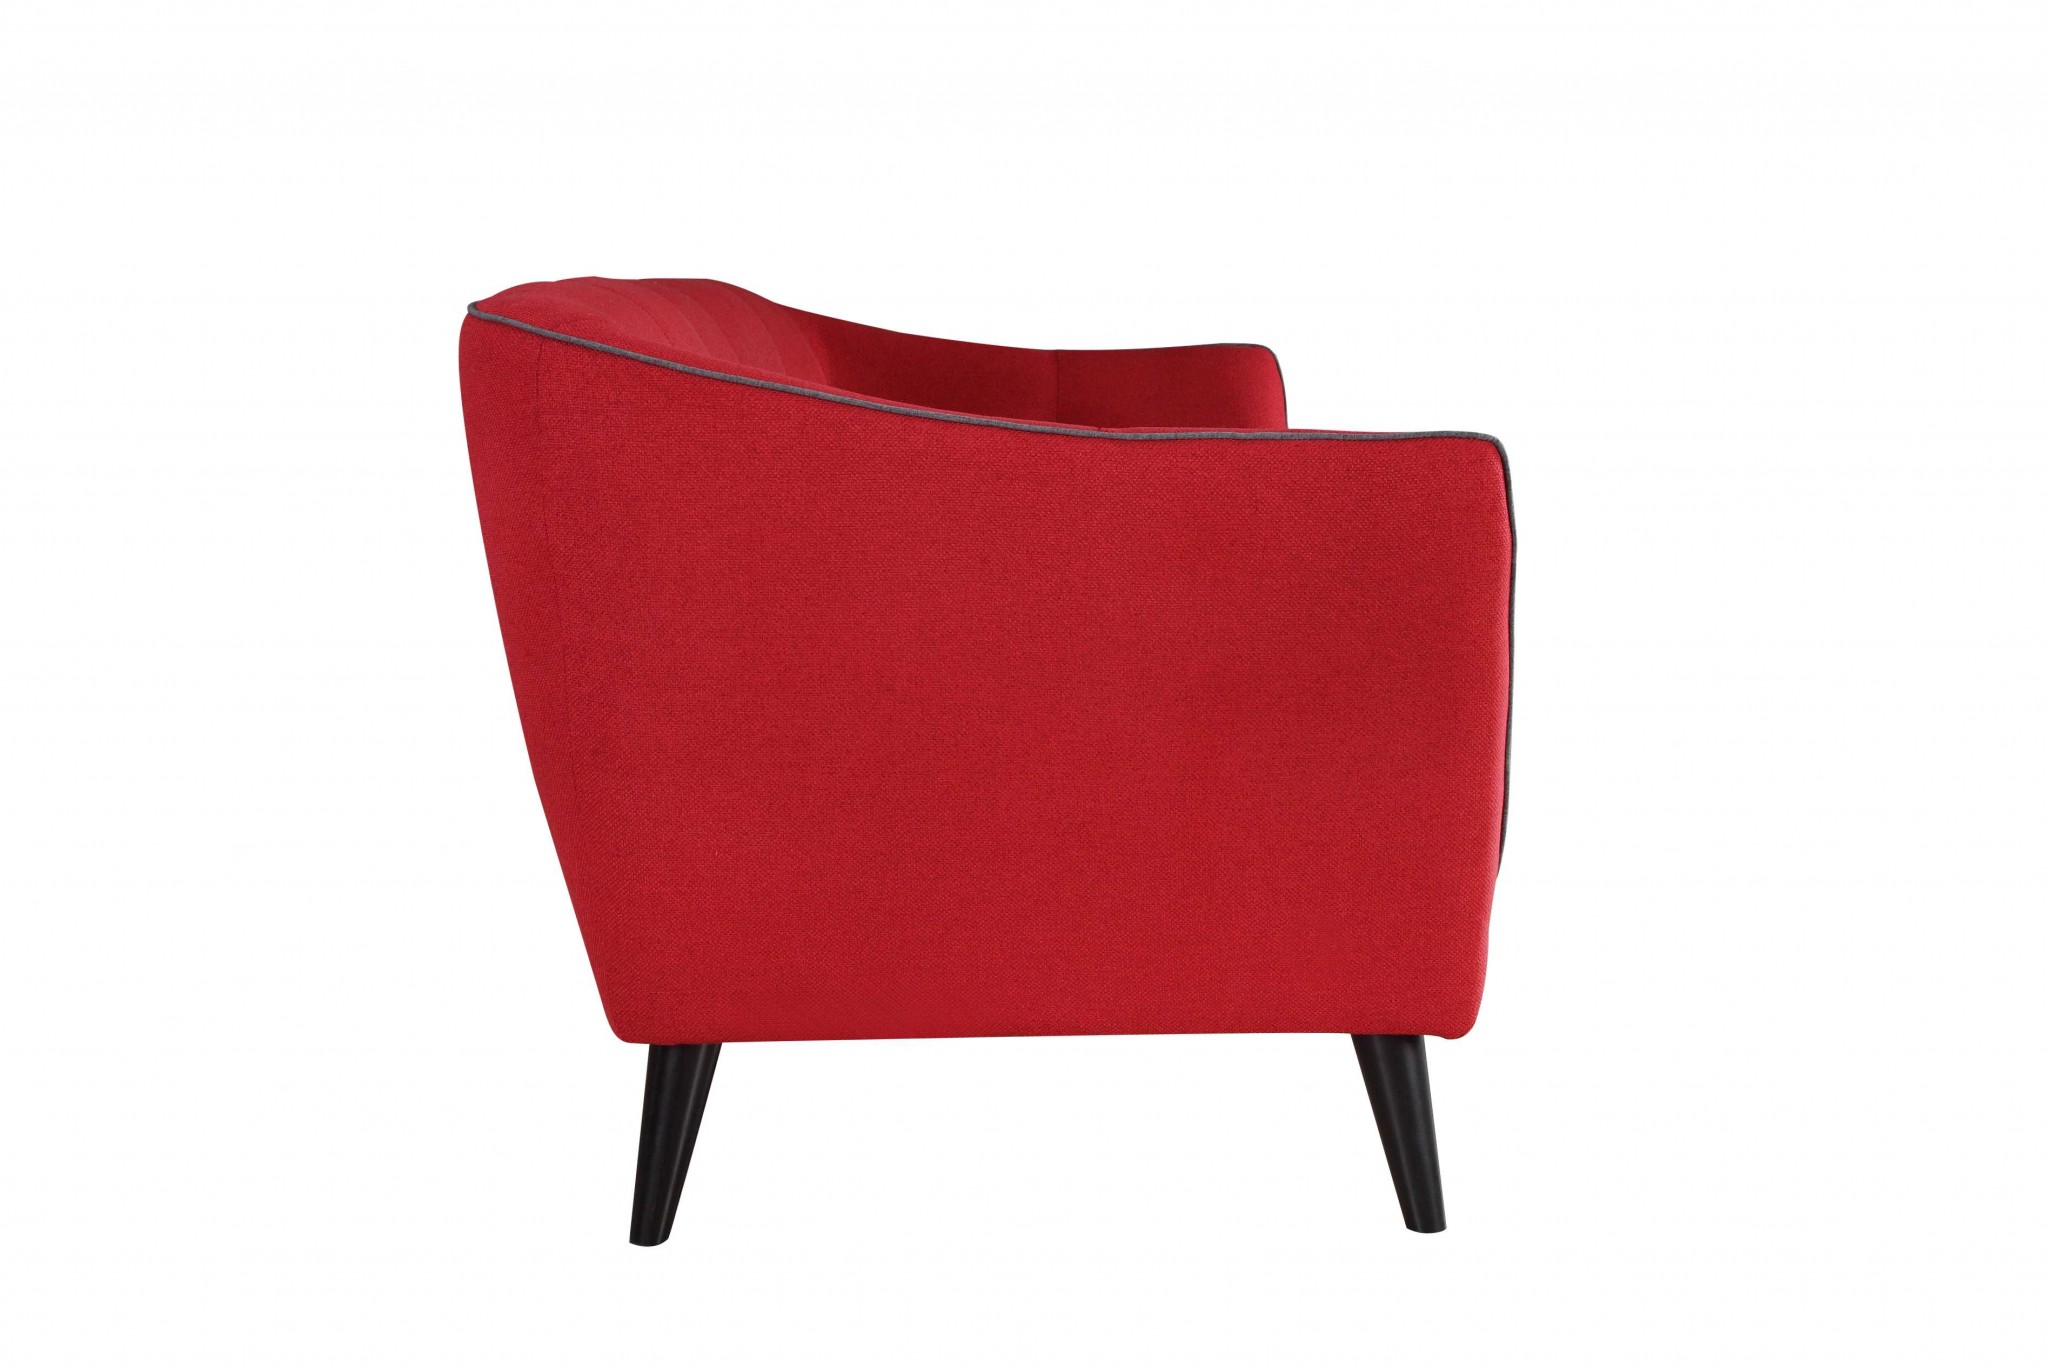 35" X 34" X 31" Red Polyester Chair